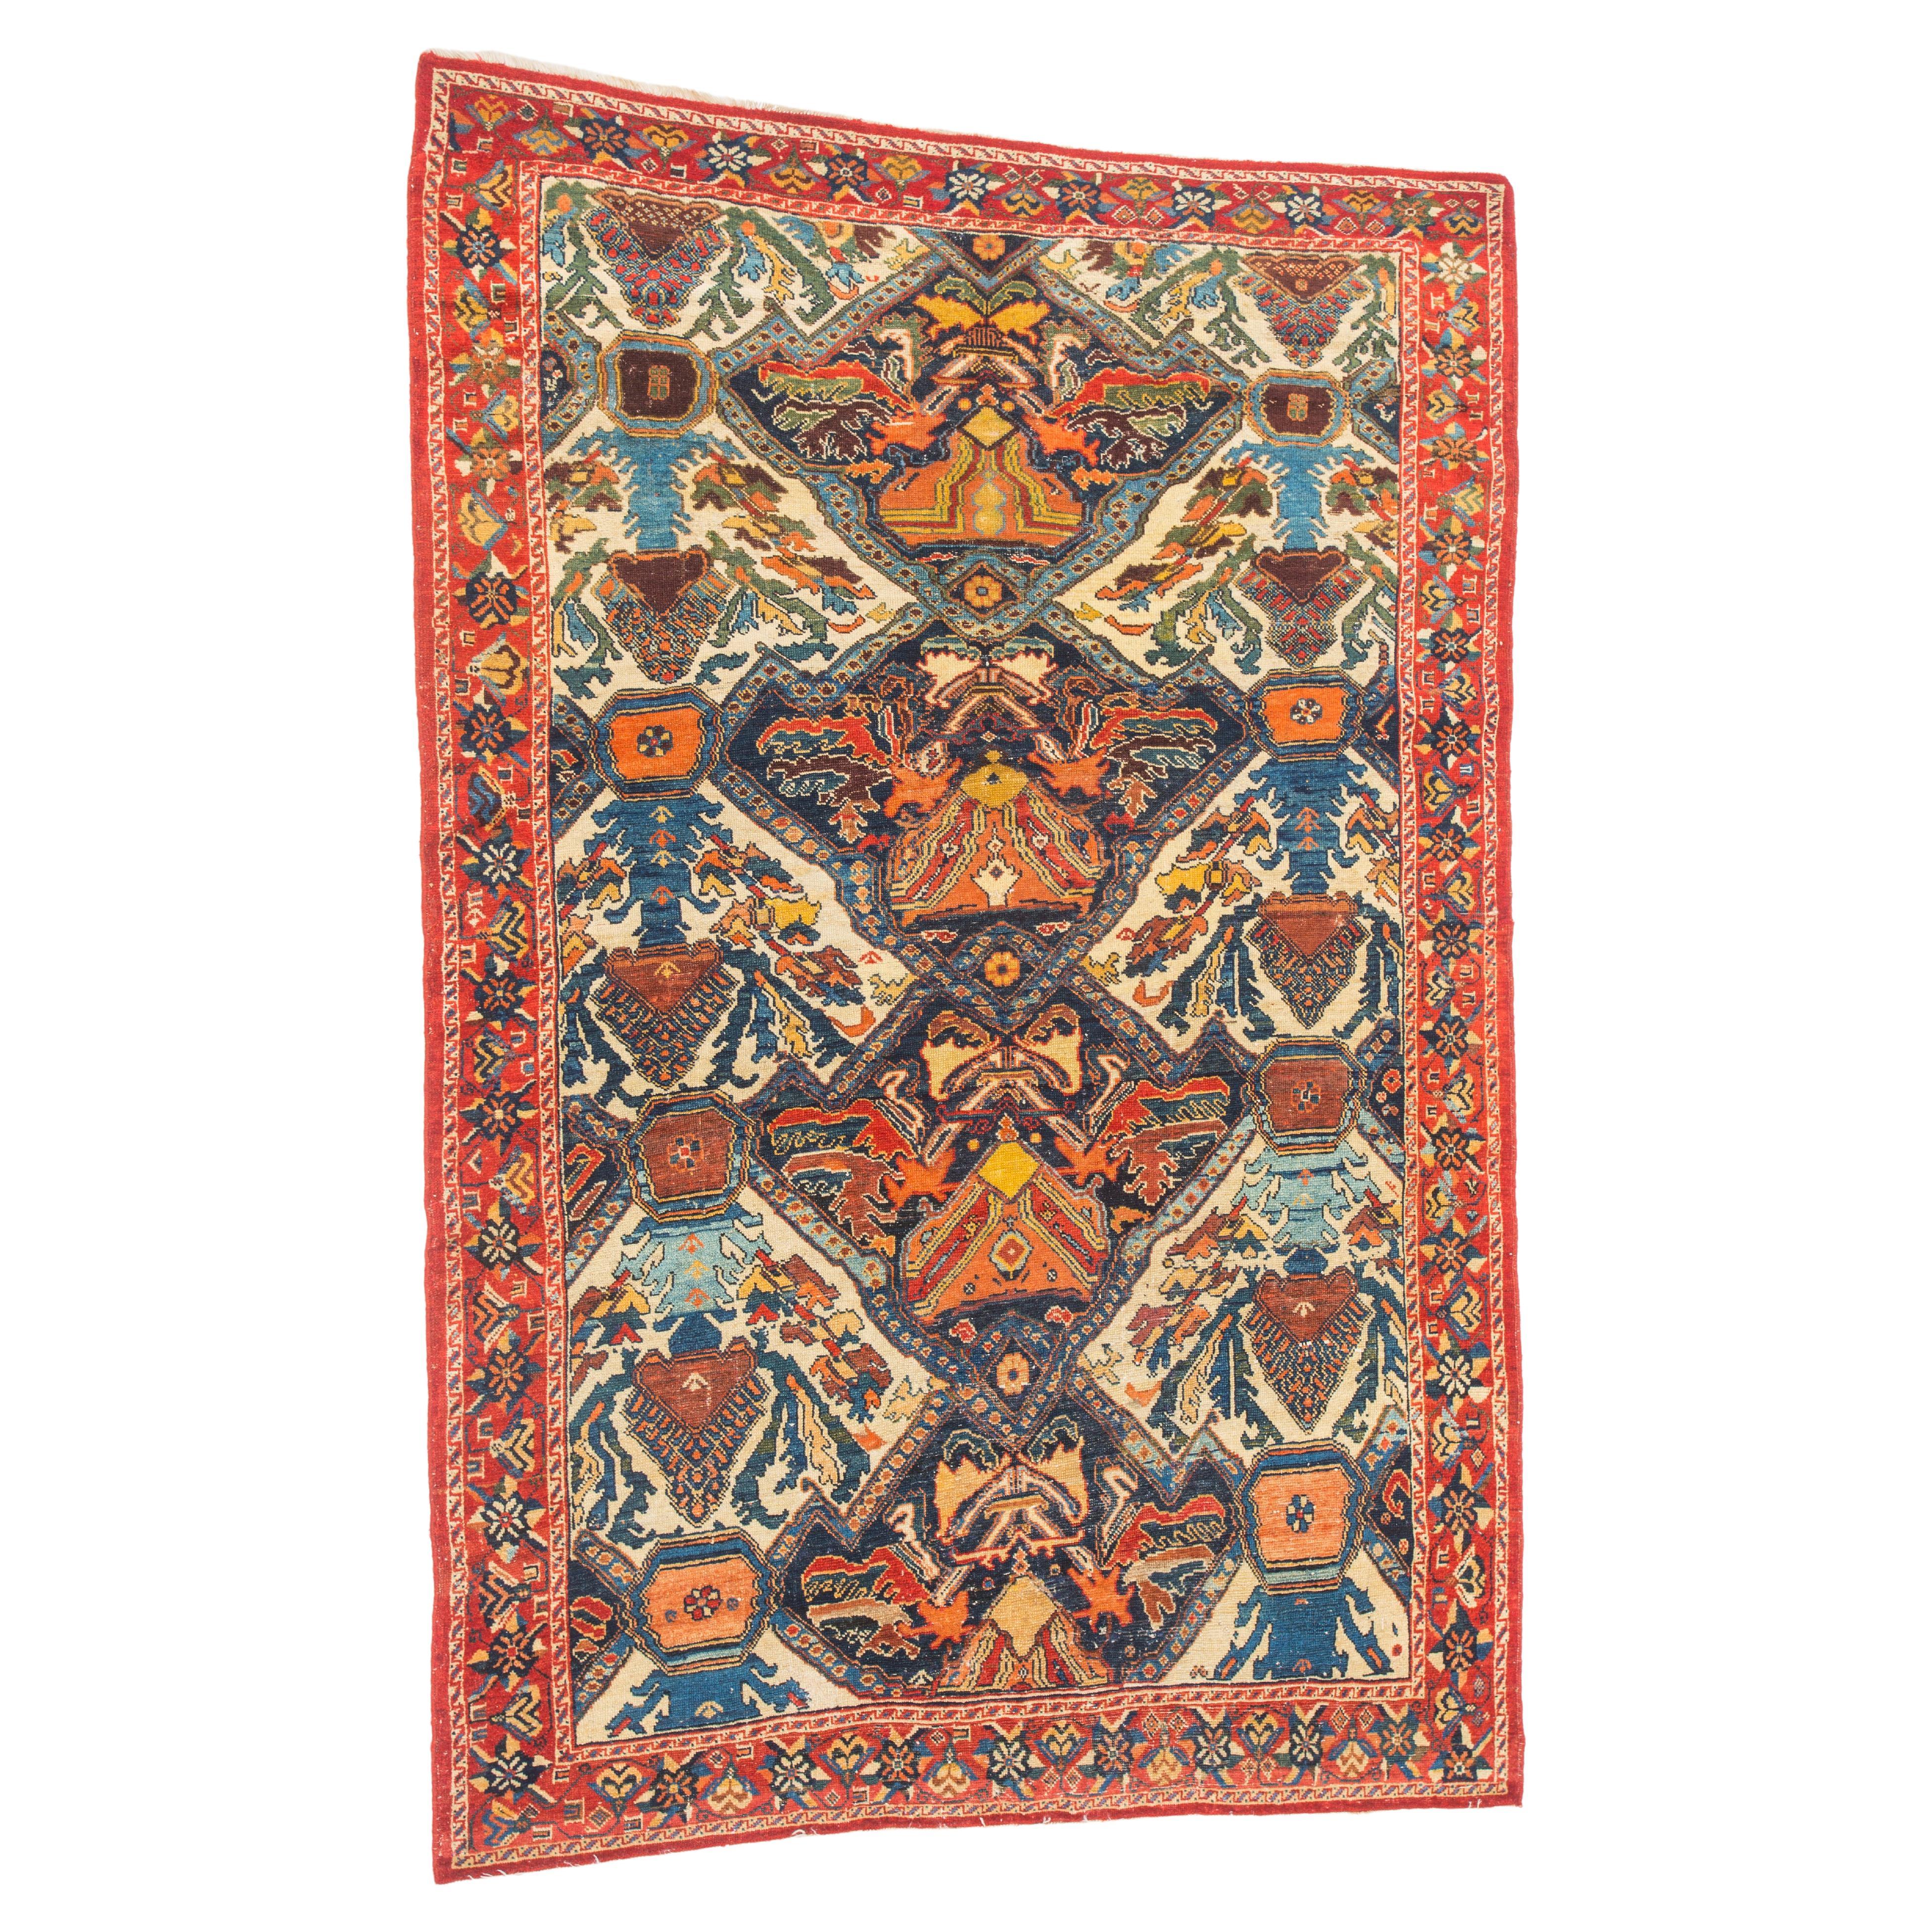 Astonishing 19th Century Rare Afshar Tribal rug  featured in famous book  For Sale